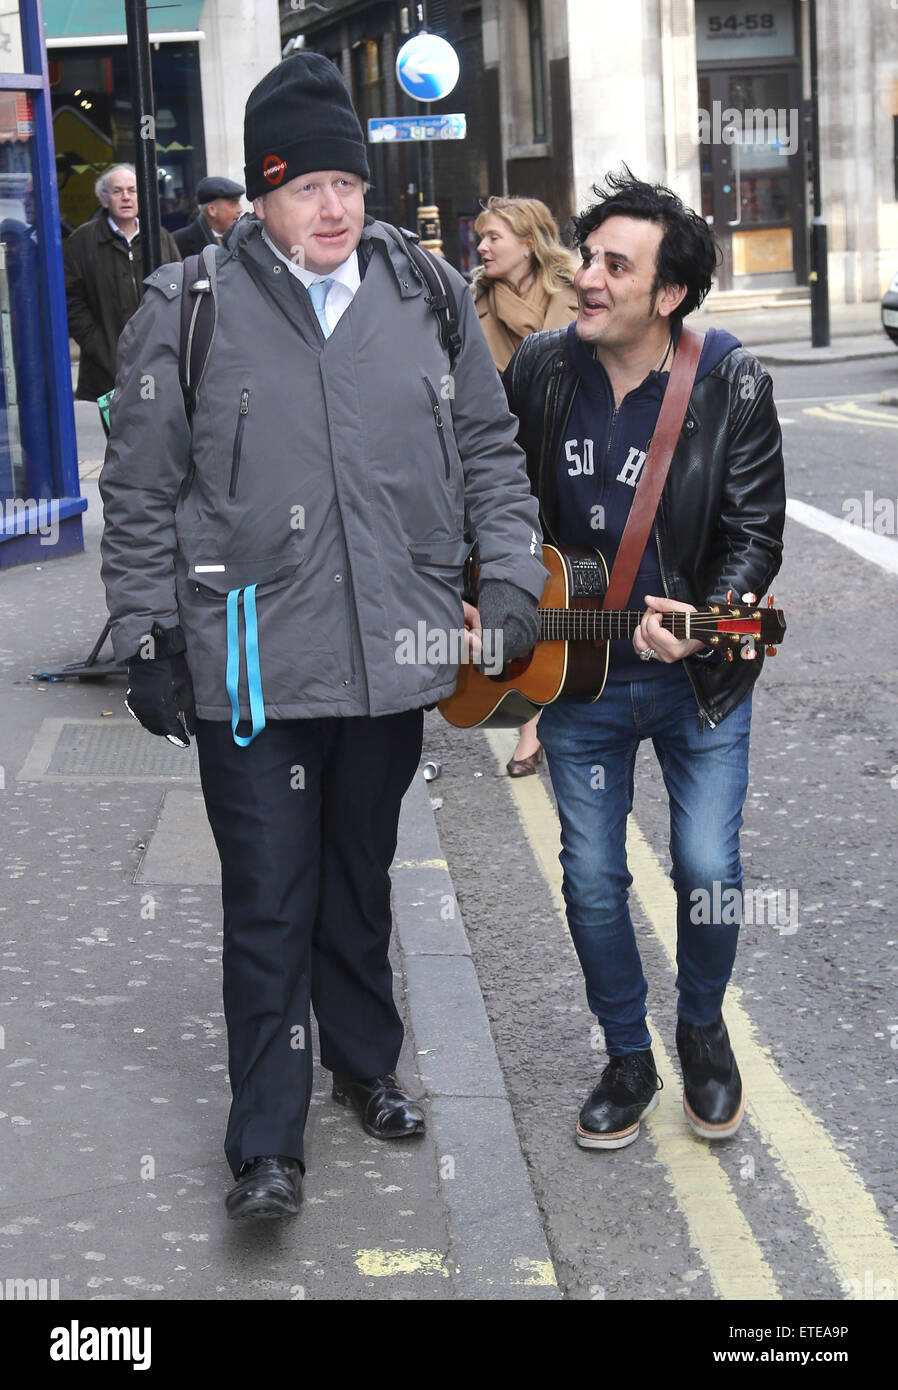 The Voice contestant Tim Arnold meets with London Mayor Boris Johnson in London's Soho district. Arnold, who was snapped up by judge Ricky Wilson on Saturday's show, is also the voice of Save Soho, a campaign group committed to preserving the area's heritage and preventing unsympathetic redevelopment of the area. Members include Stephen Fry and Benedict Cumberbatch.  Featuring: Tim Arnold, Boris Johnson Where: London, United Kingdom When: 02 Feb 2015 Credit: WENN.com Stock Photo